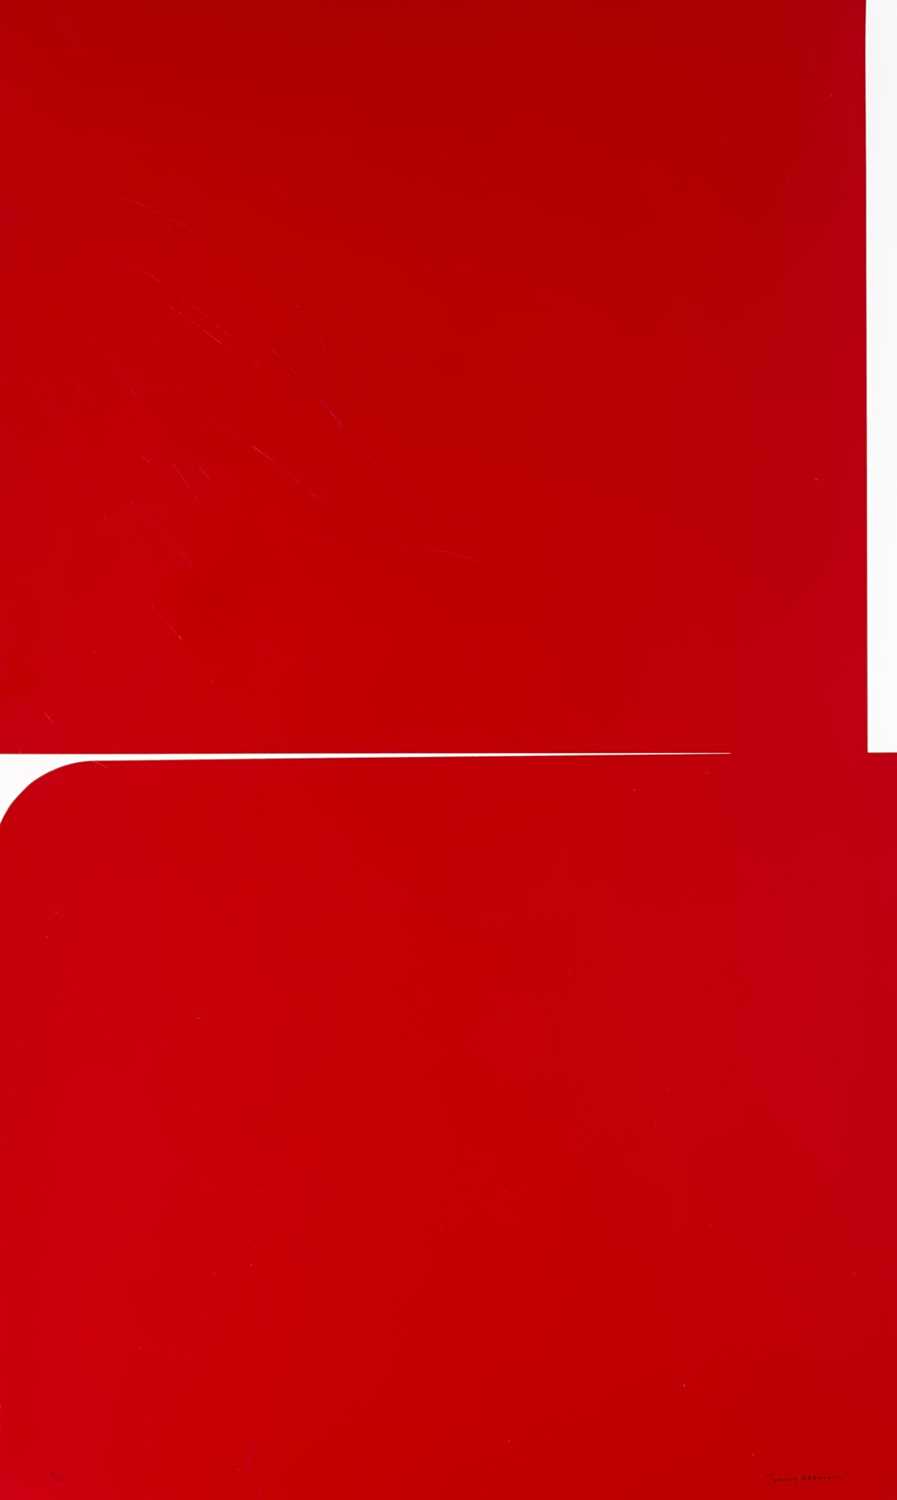 Lot 265 - Johnny Abrahams (American 1979-), 'Untitled (Red)', 2021